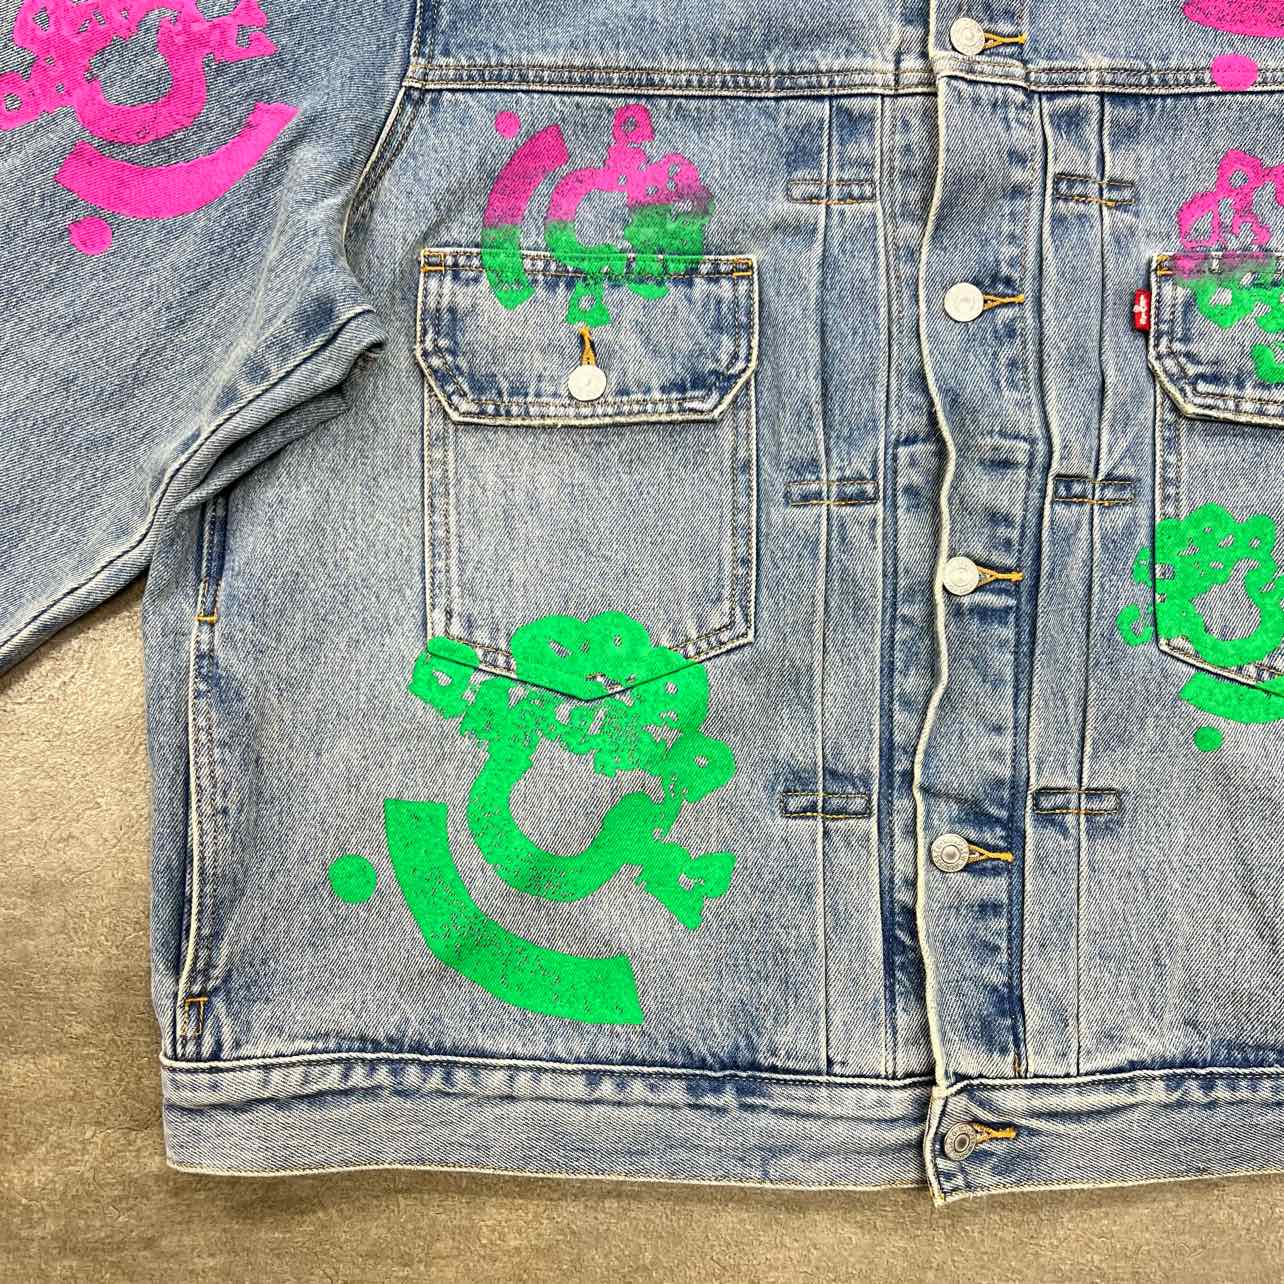 Denim Tears Jacket &quot;BSTROY TEARS&quot; Pink/Green Used Size 2XL